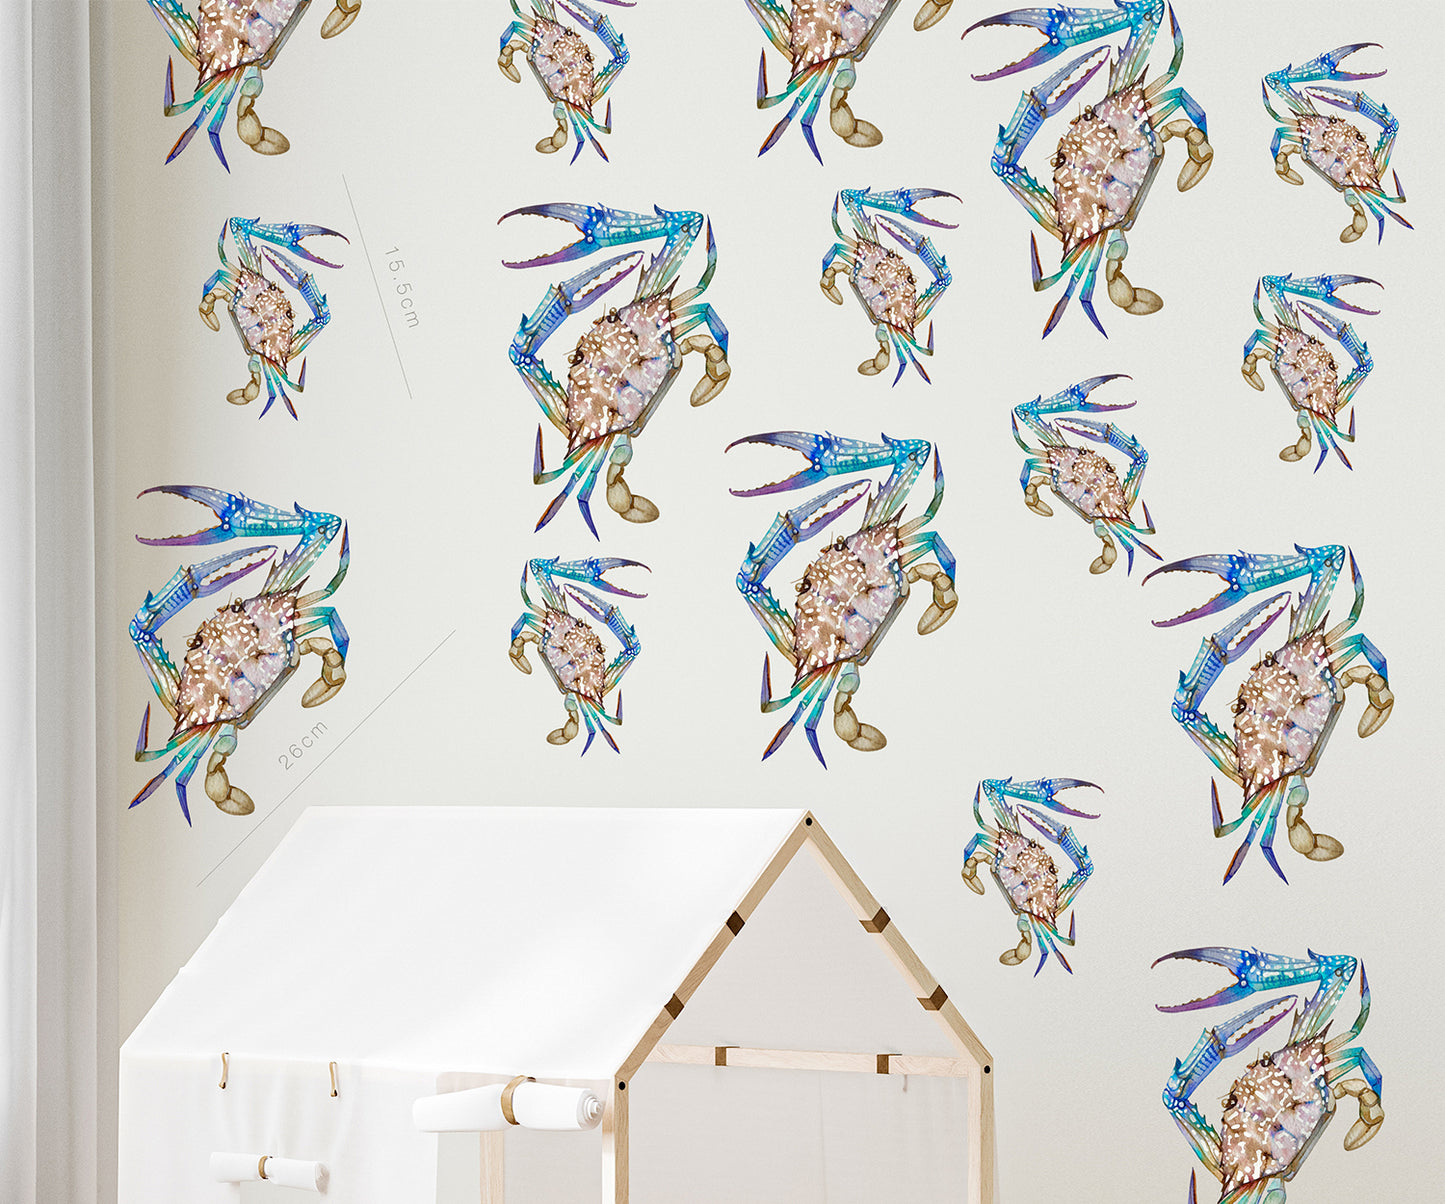 Two salty crabs wall decal